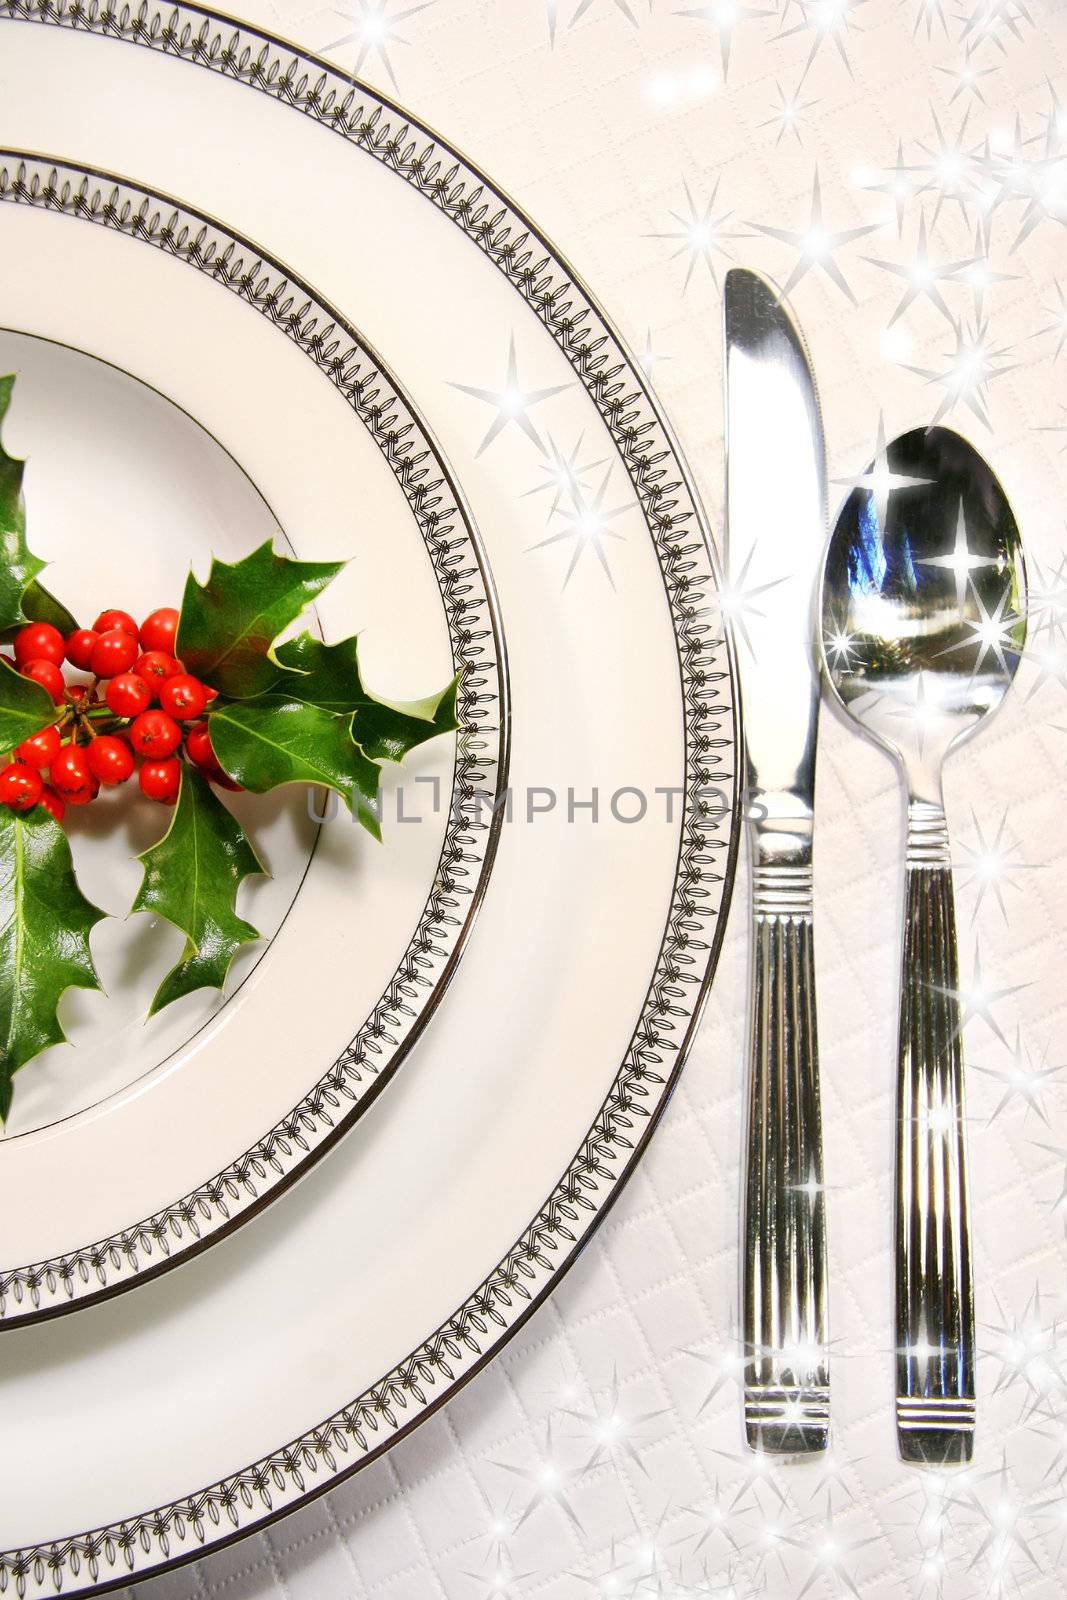 Silver plate setting with a sprig of holly and stars